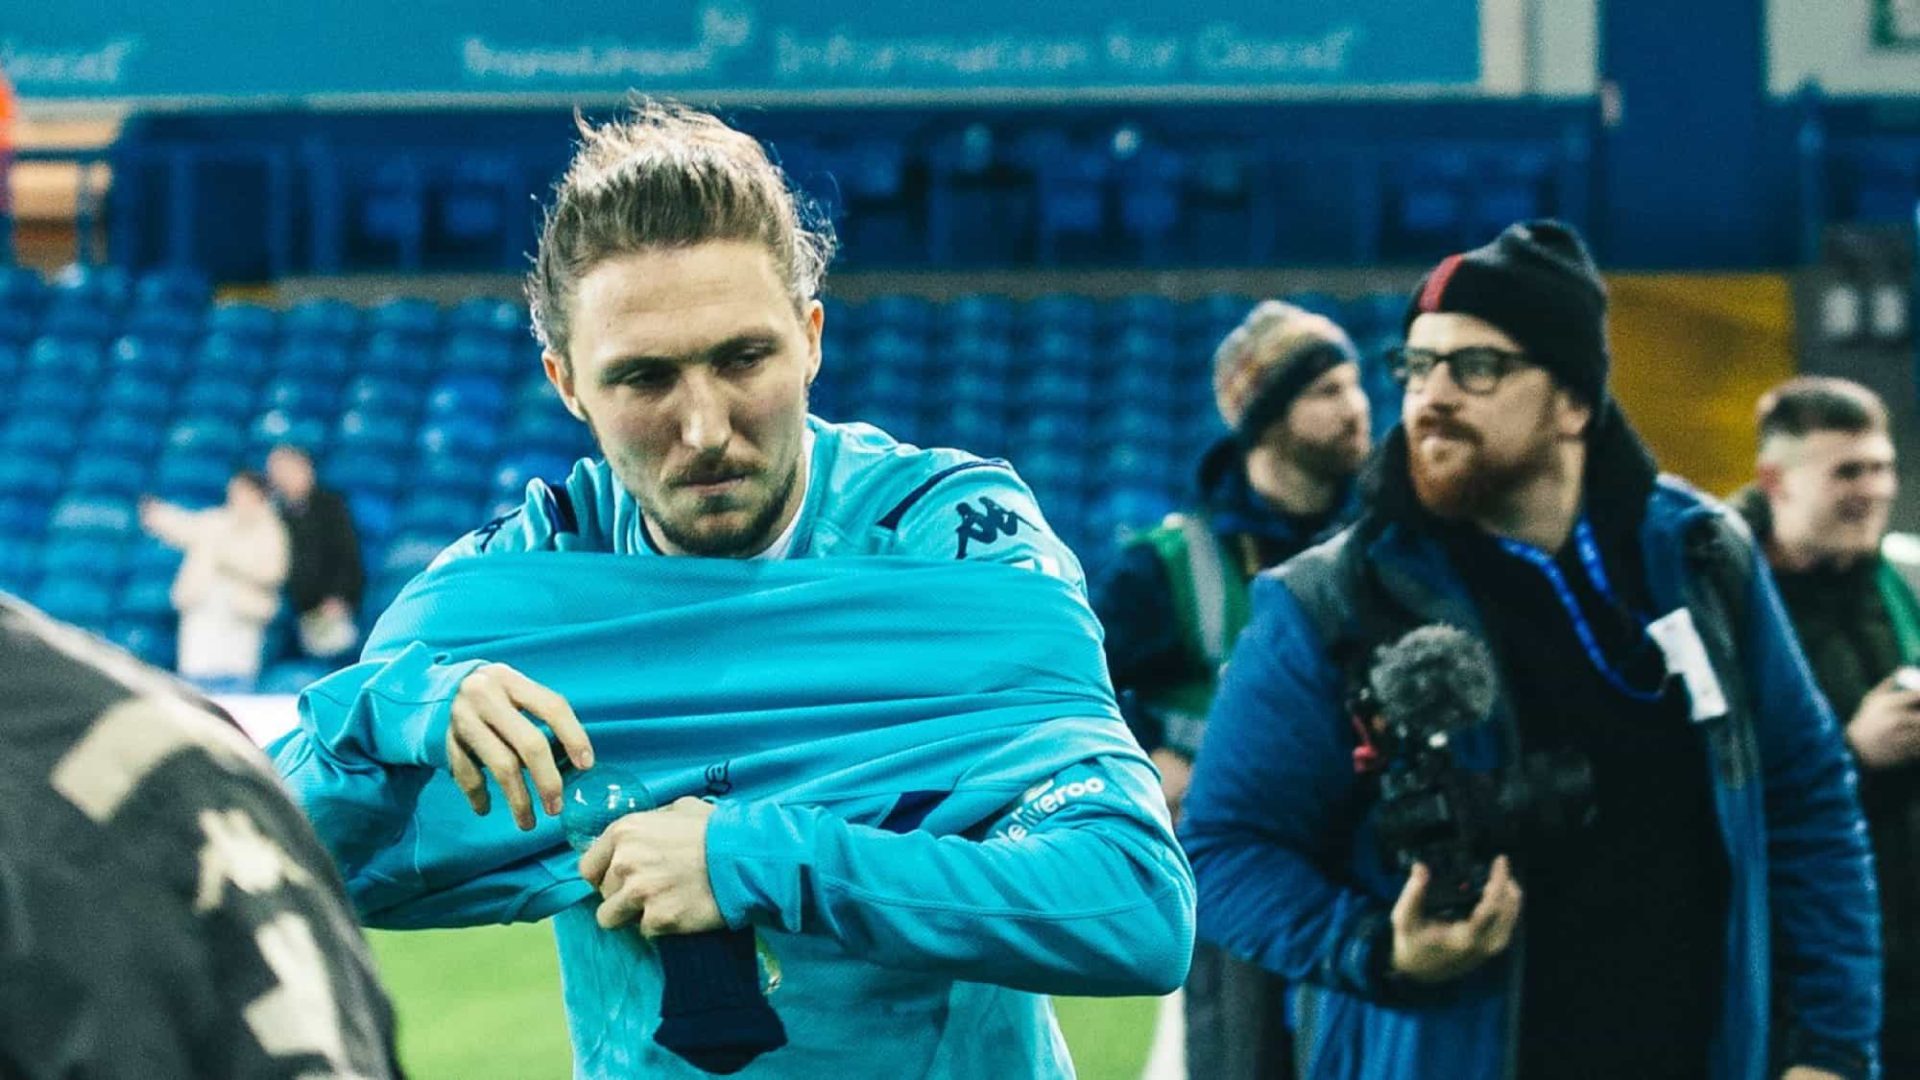 Luke Ayling putting a training top on and looking annoyed about things